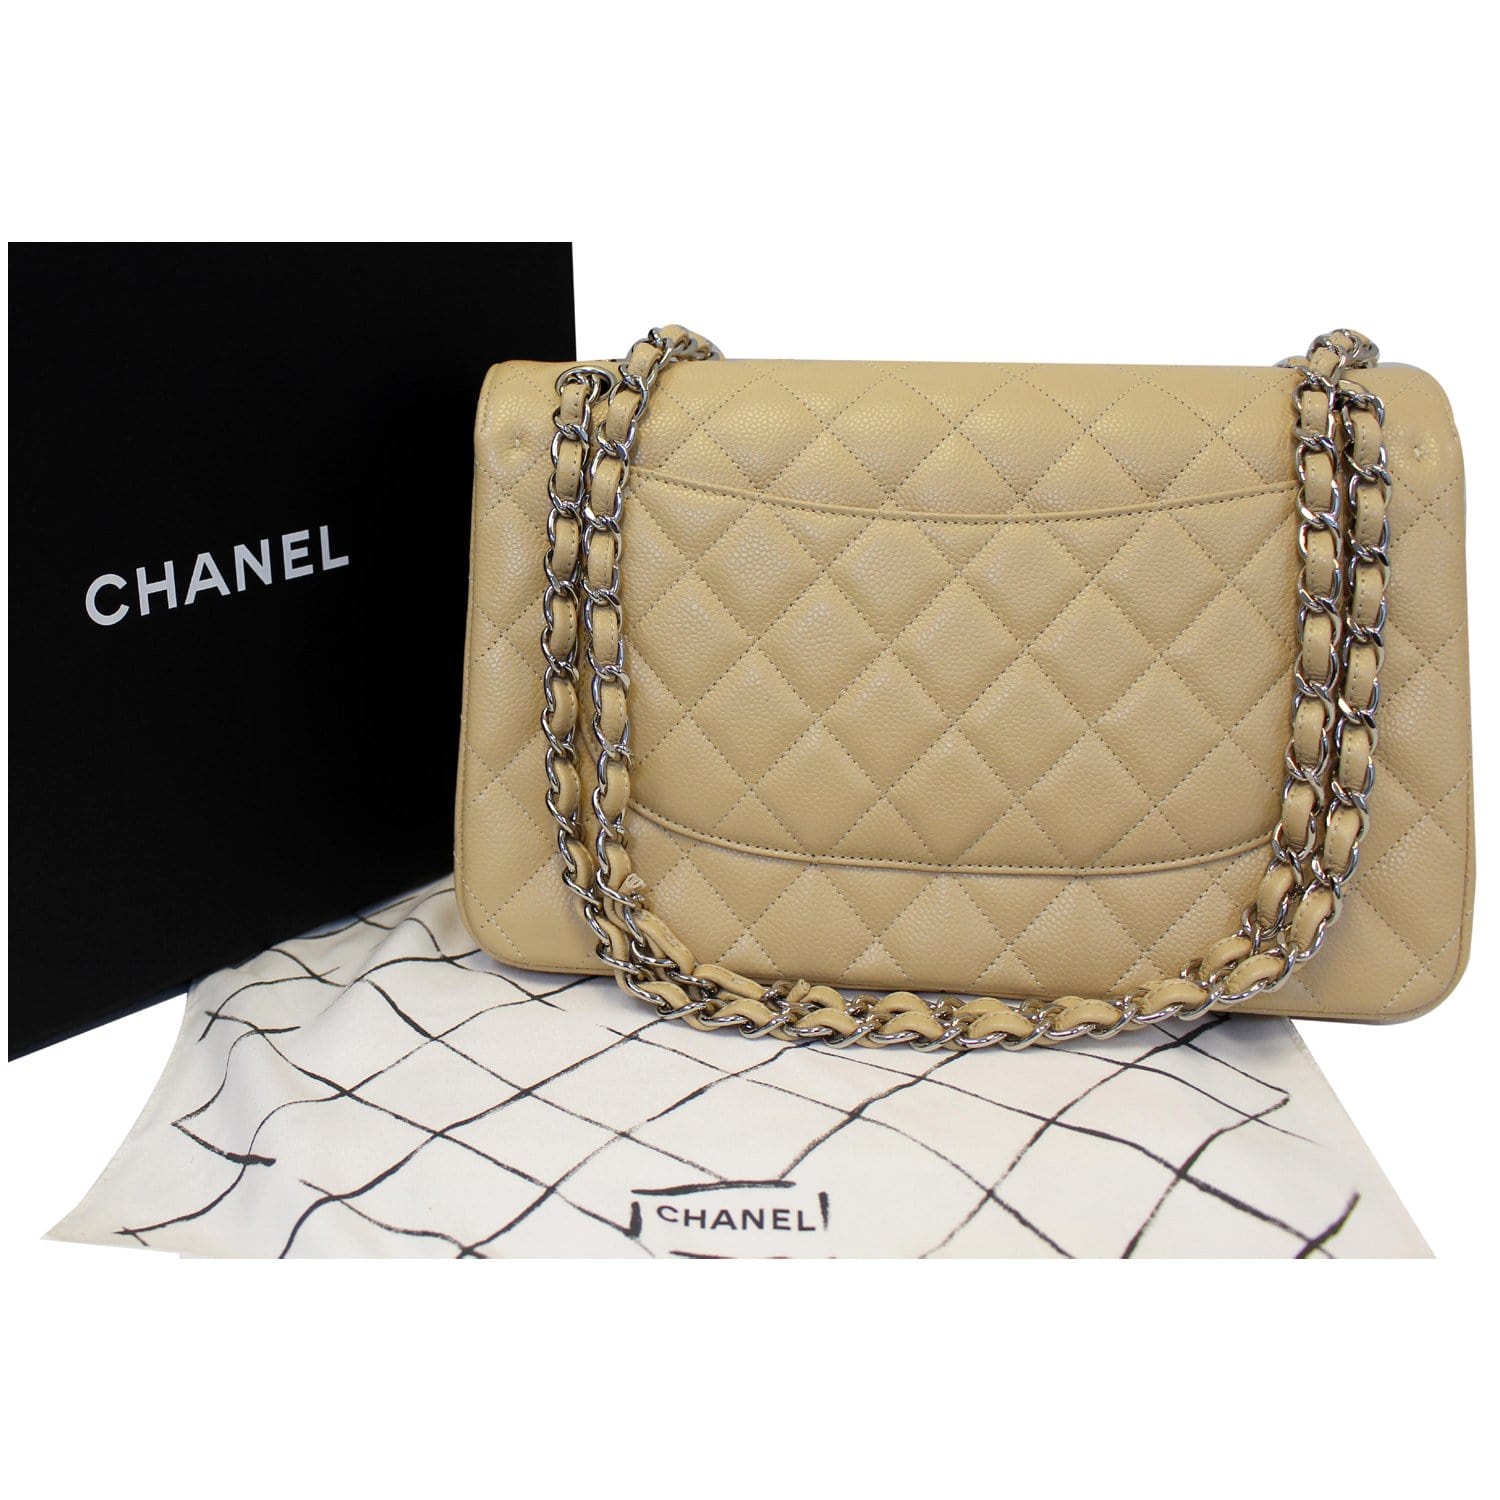 CHANEL Timeless Classic Jumbo Double Flap Caviar Leather Shoulder